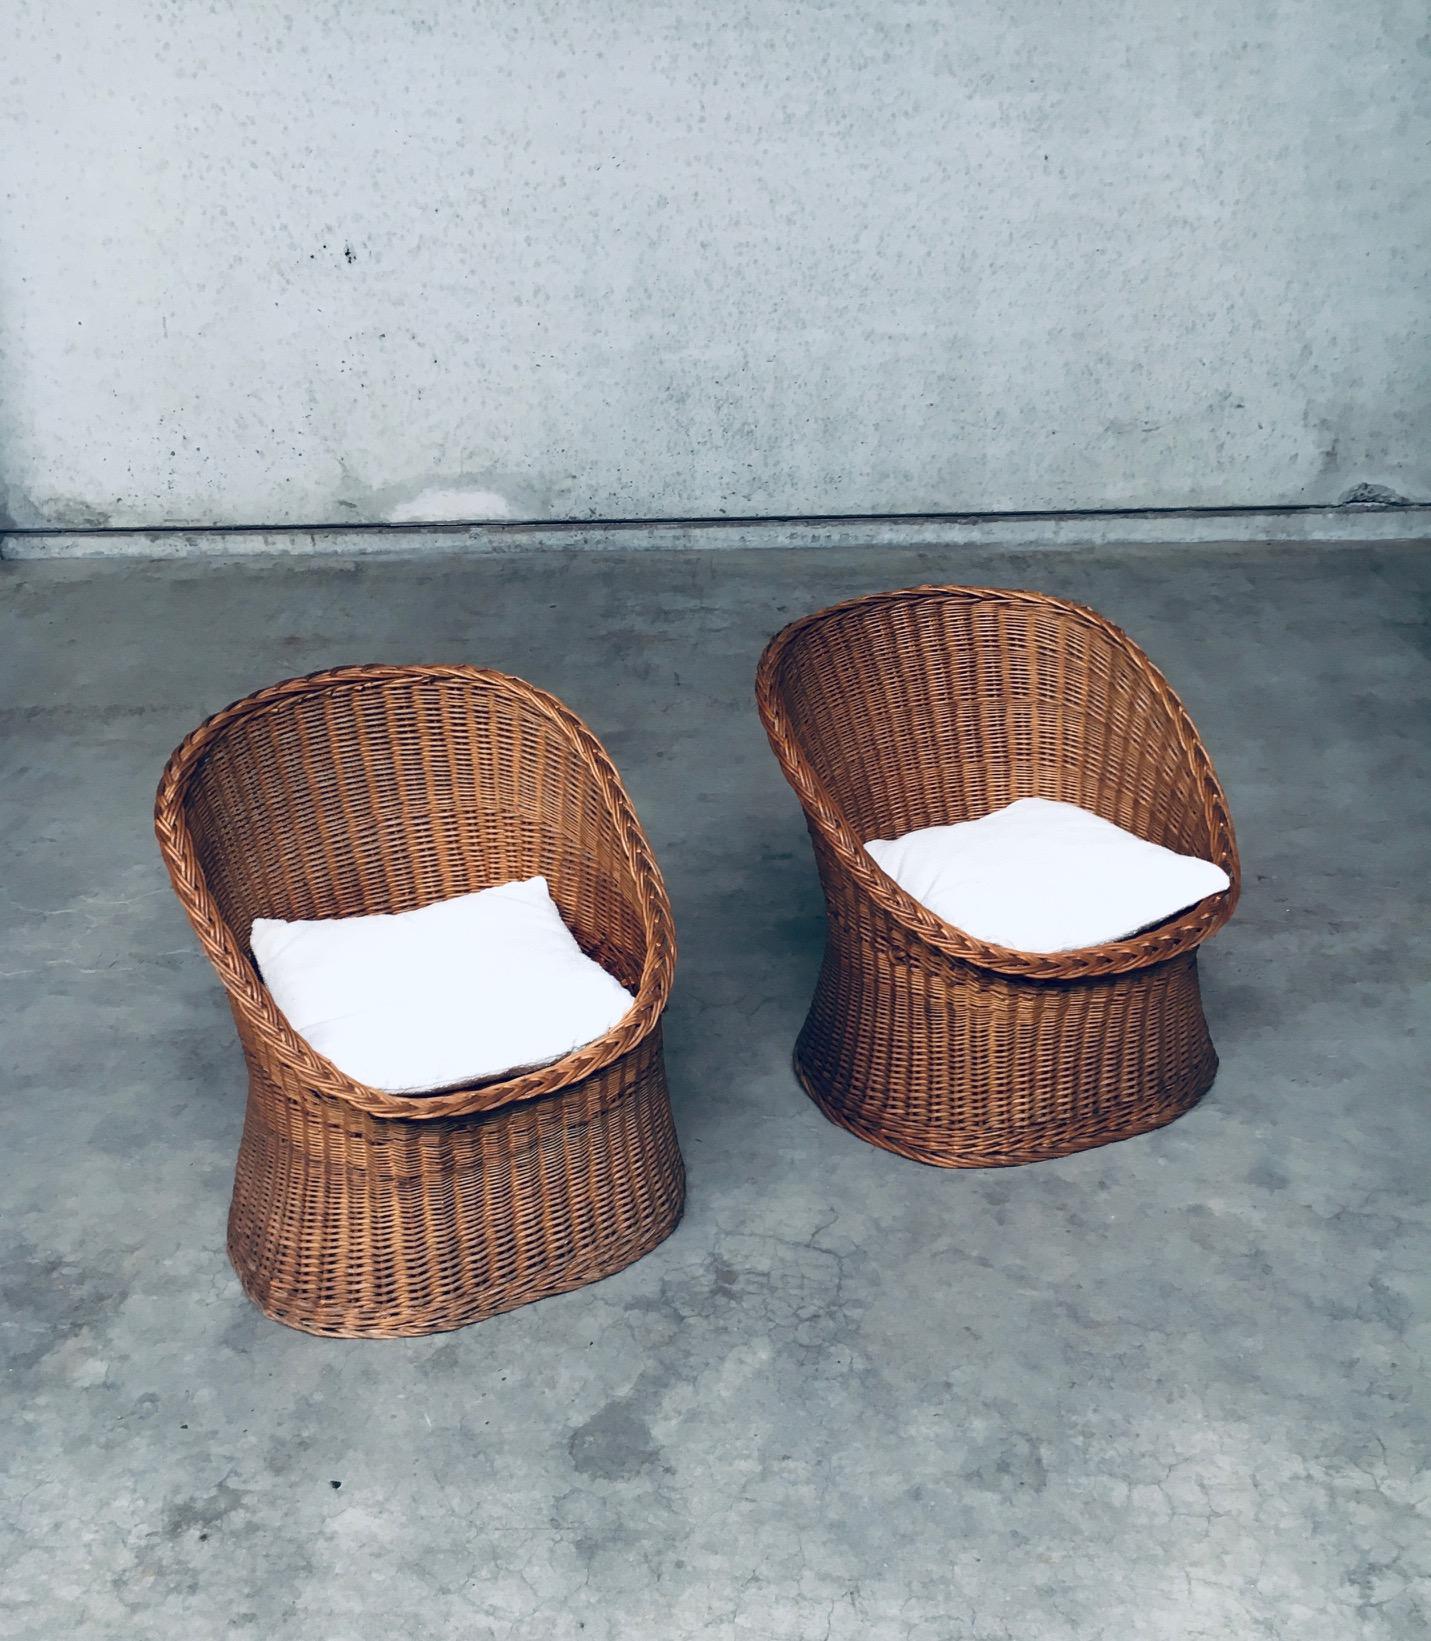 Vintage Boho Design Style Egg Basket Barrel Lounge Chair set of 2. Made in France, 1950's period. Rattan / Cane / Wicker woven handmade seats, with new bouclé cushion. These are handmade, which is clear in the slight difference in size. Beautiful in